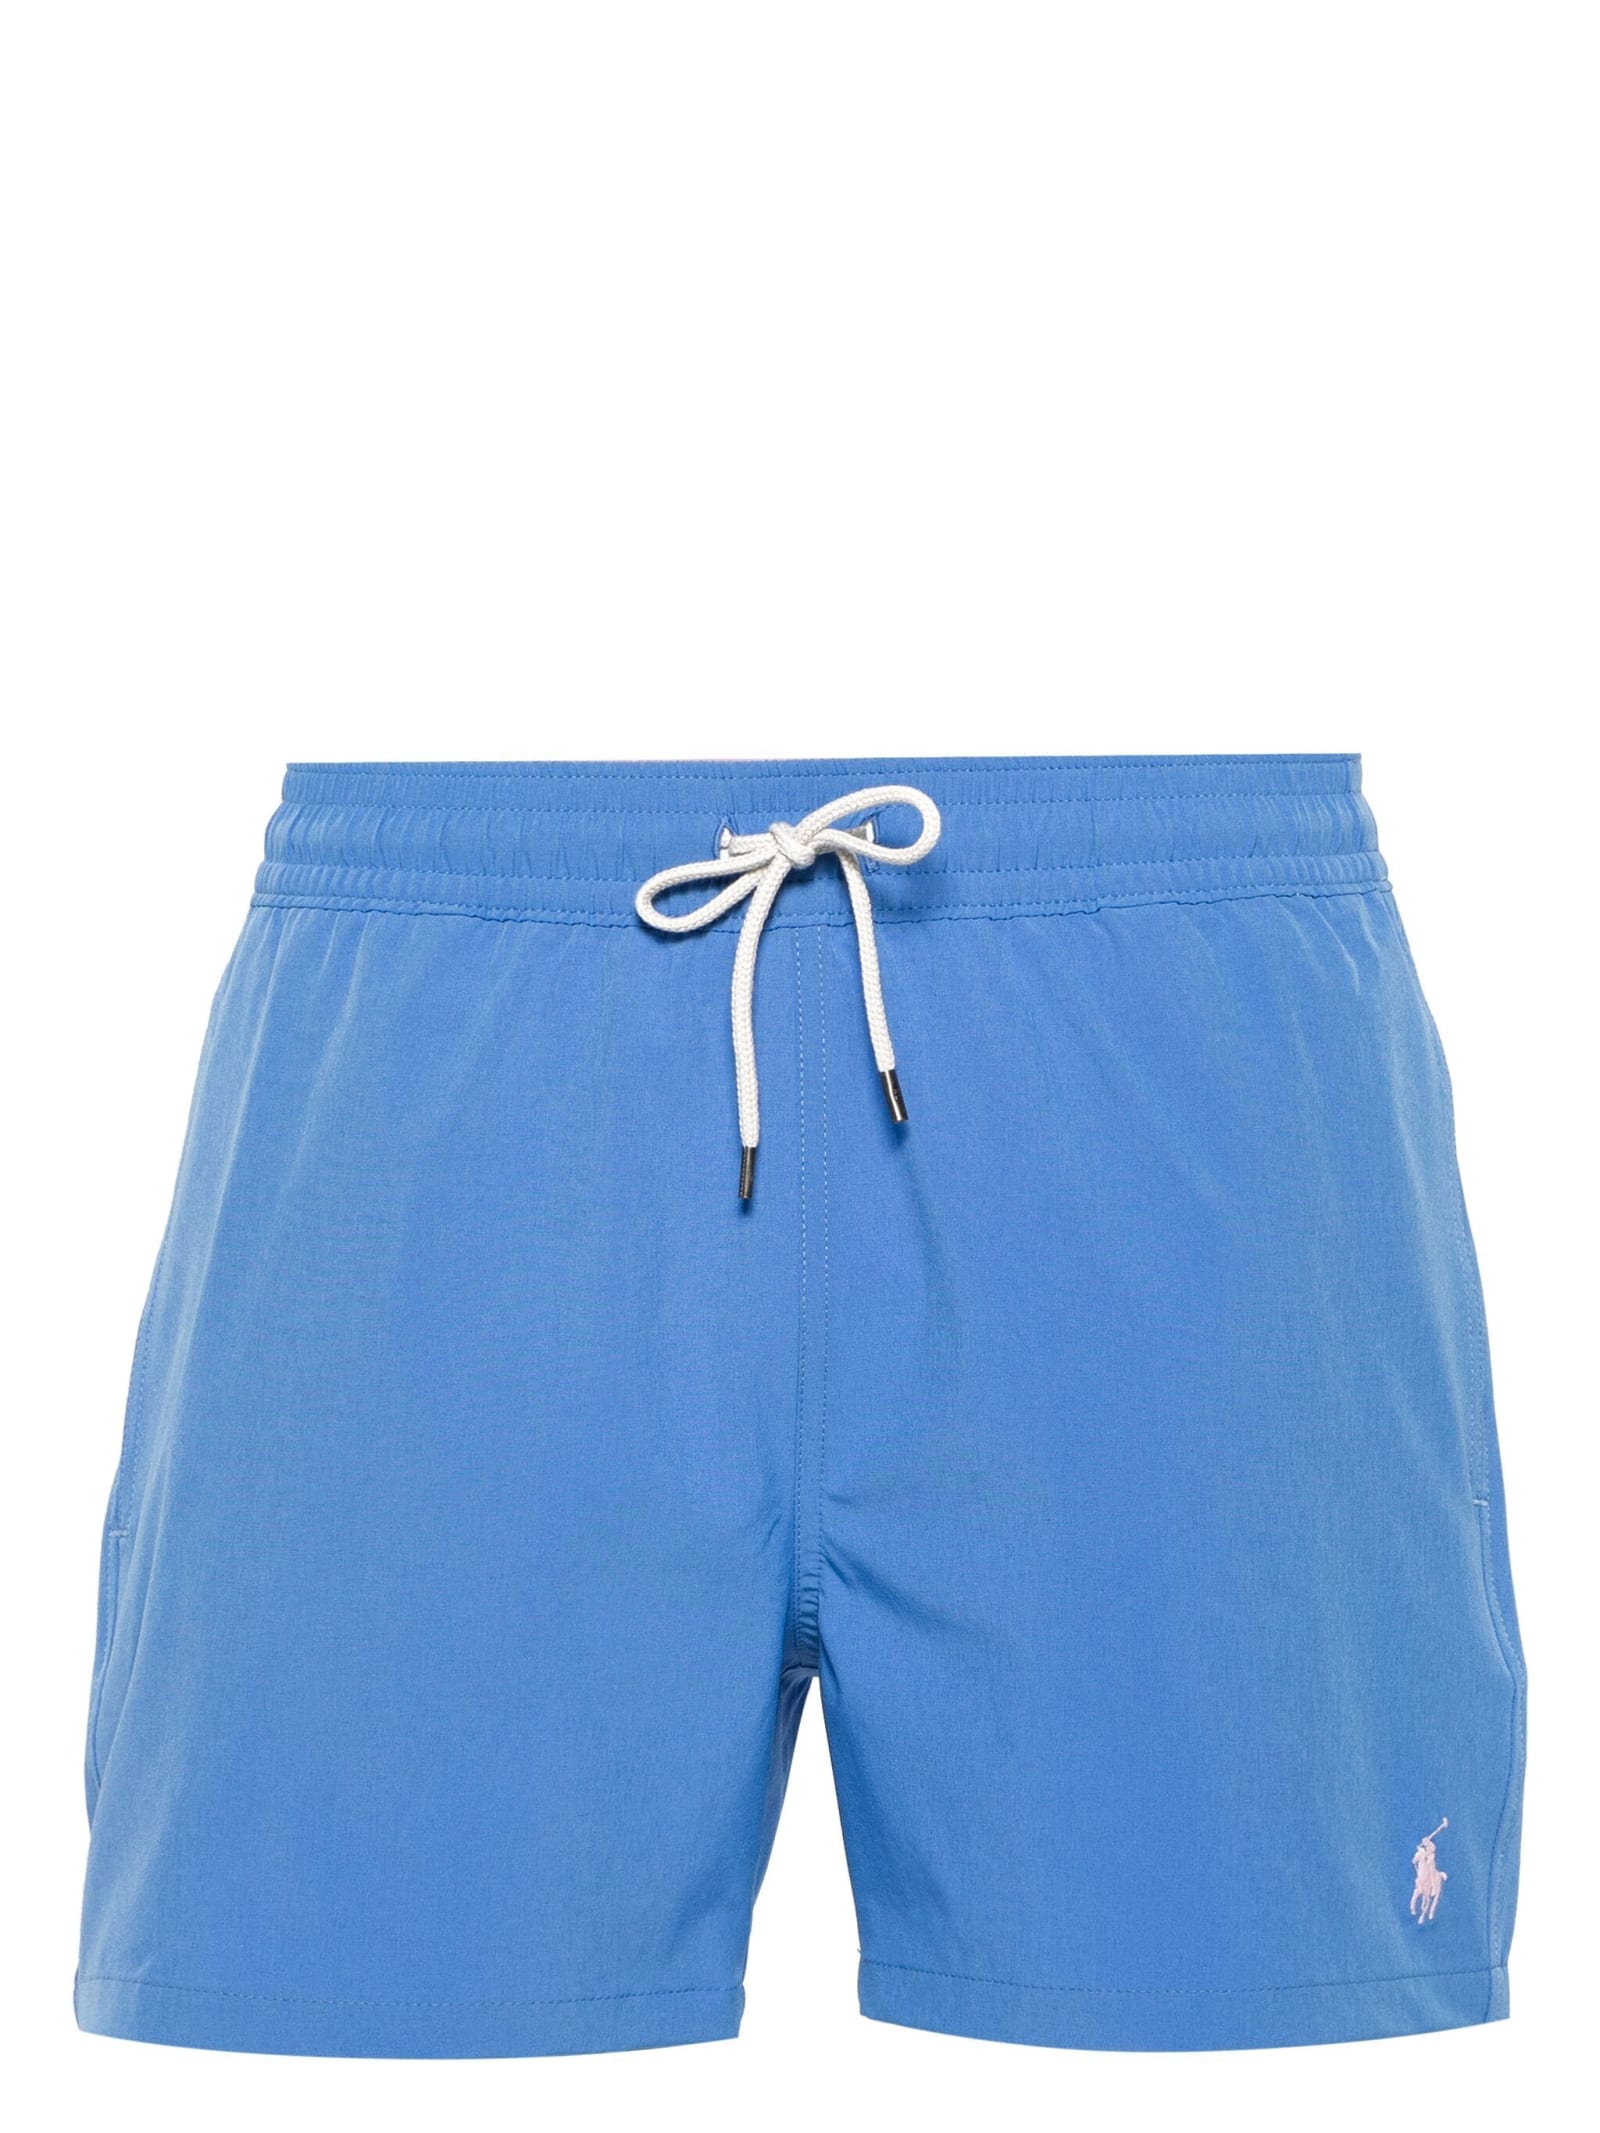 Ralph Lauren Light Blue Swim Shorts With Embroidered Pony